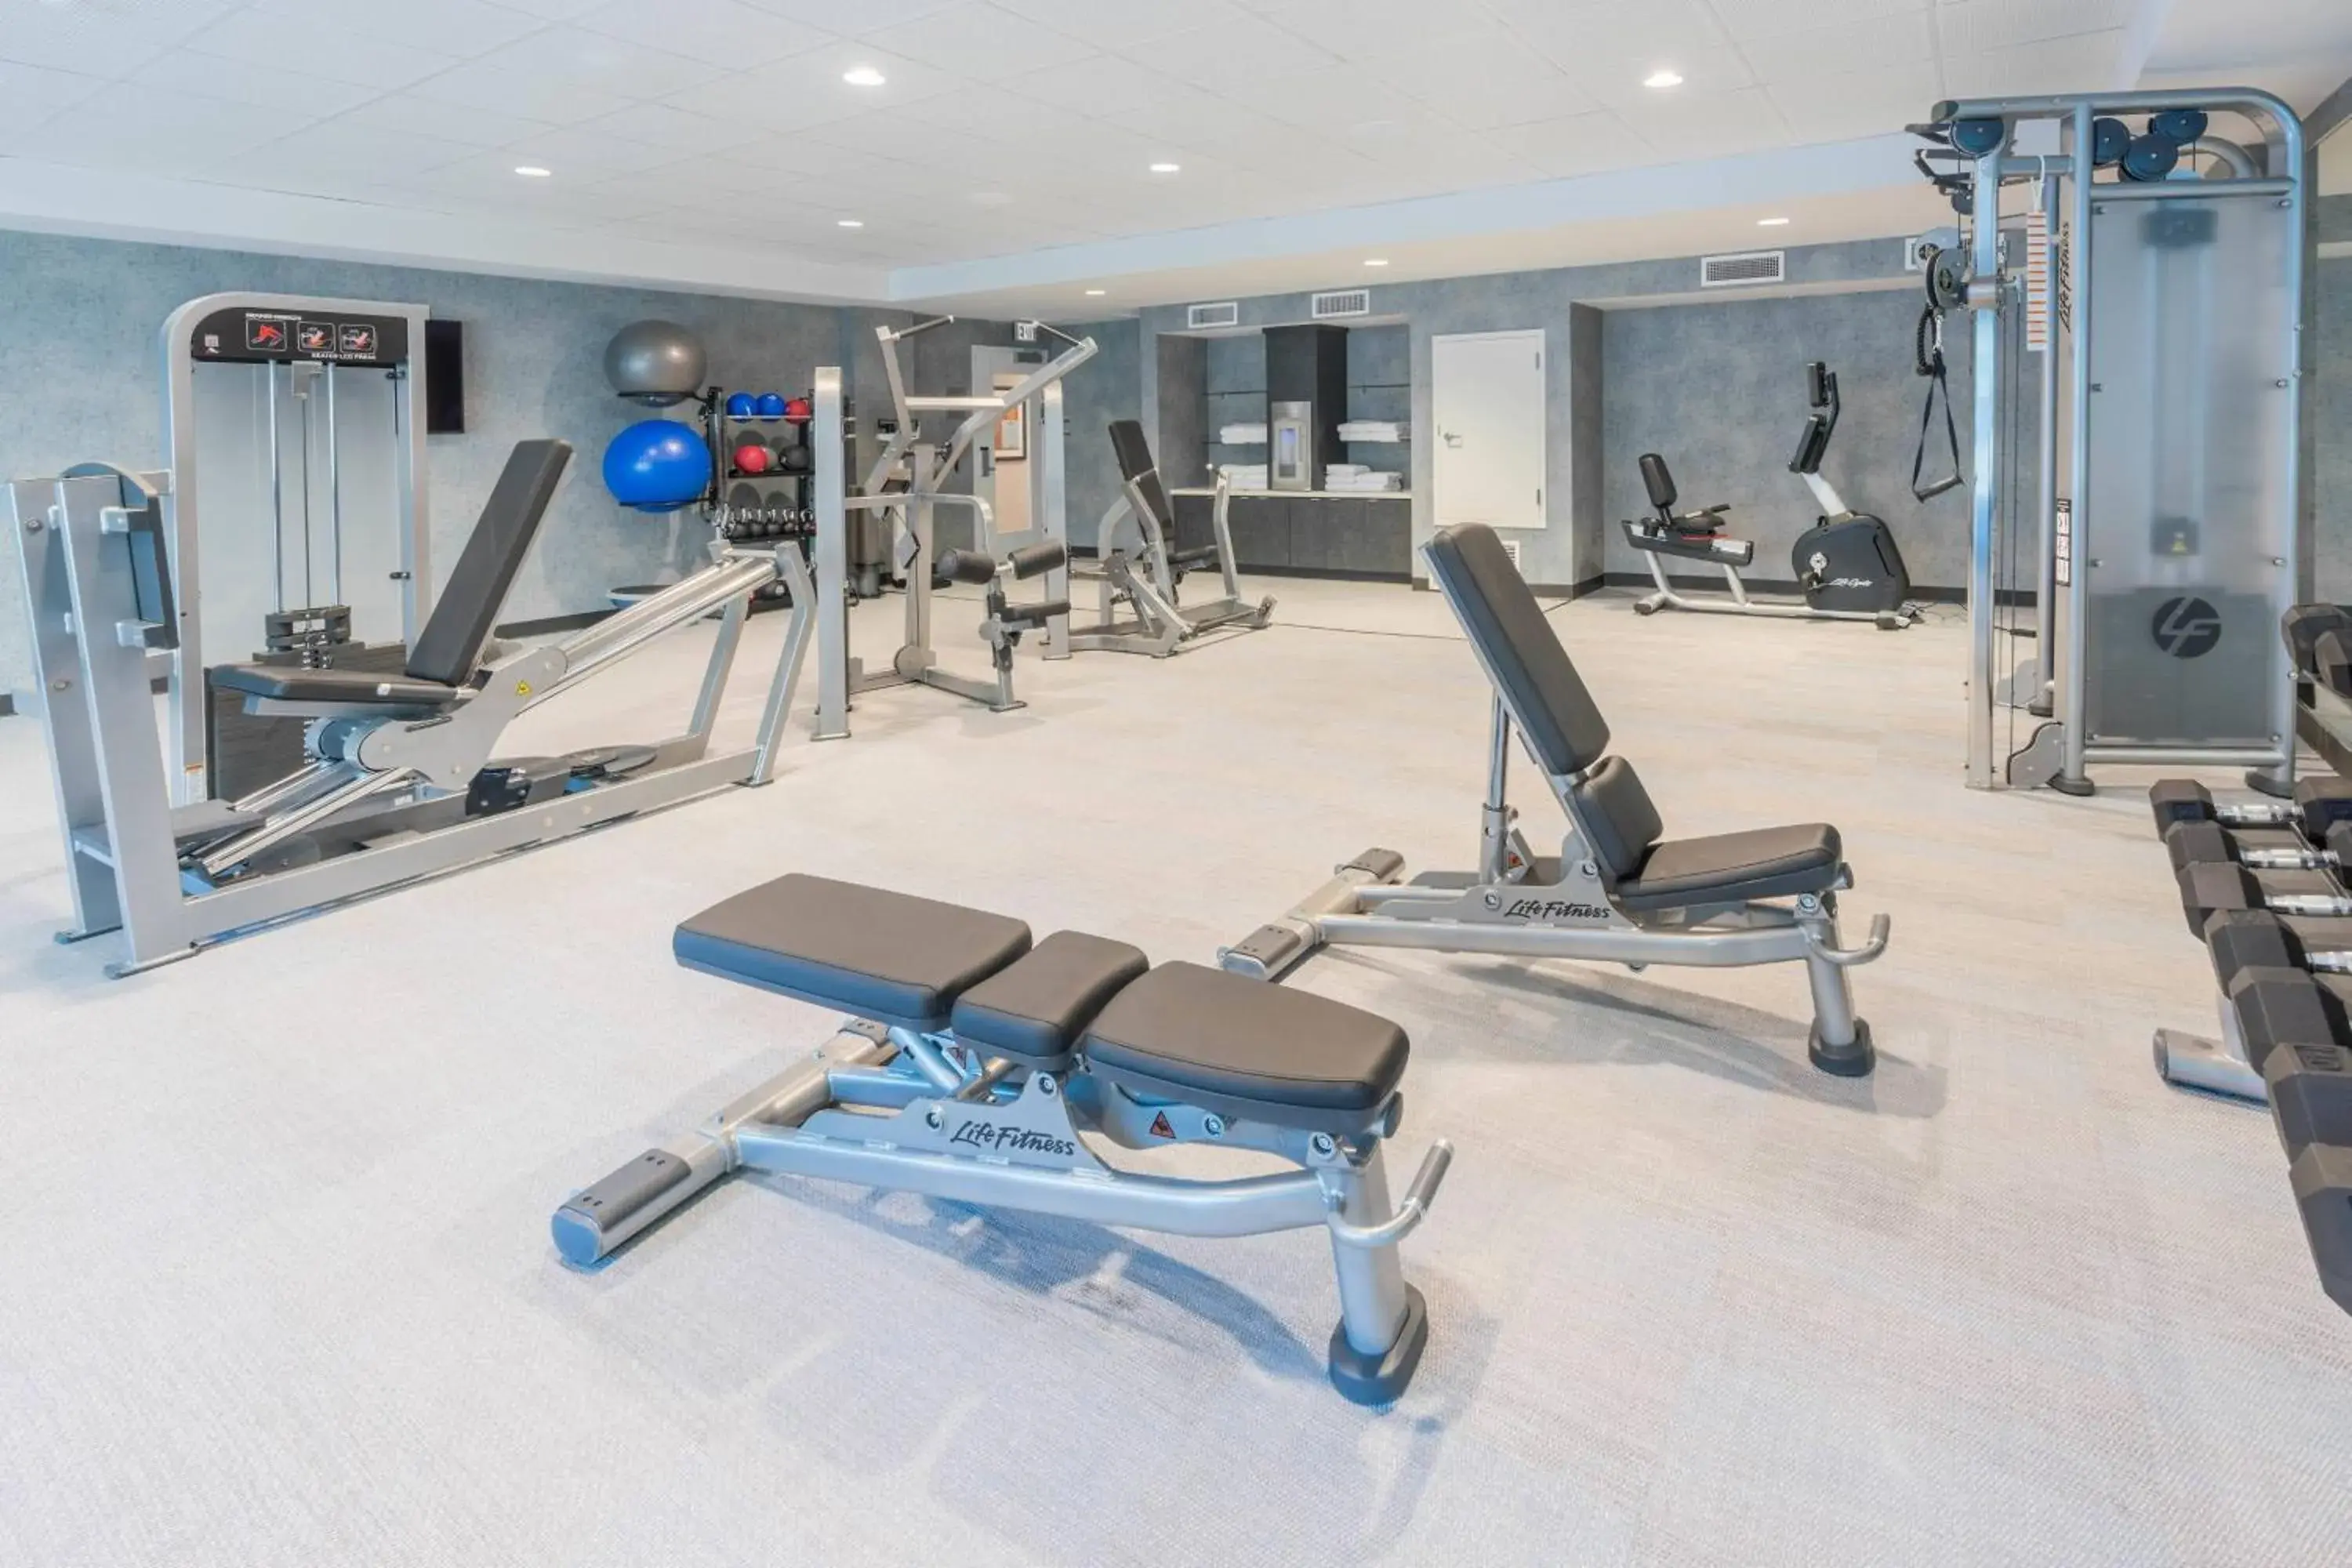 Fitness centre/facilities, Fitness Center/Facilities in TownePlace Suites by Marriott Thousand Oaks Agoura Hills